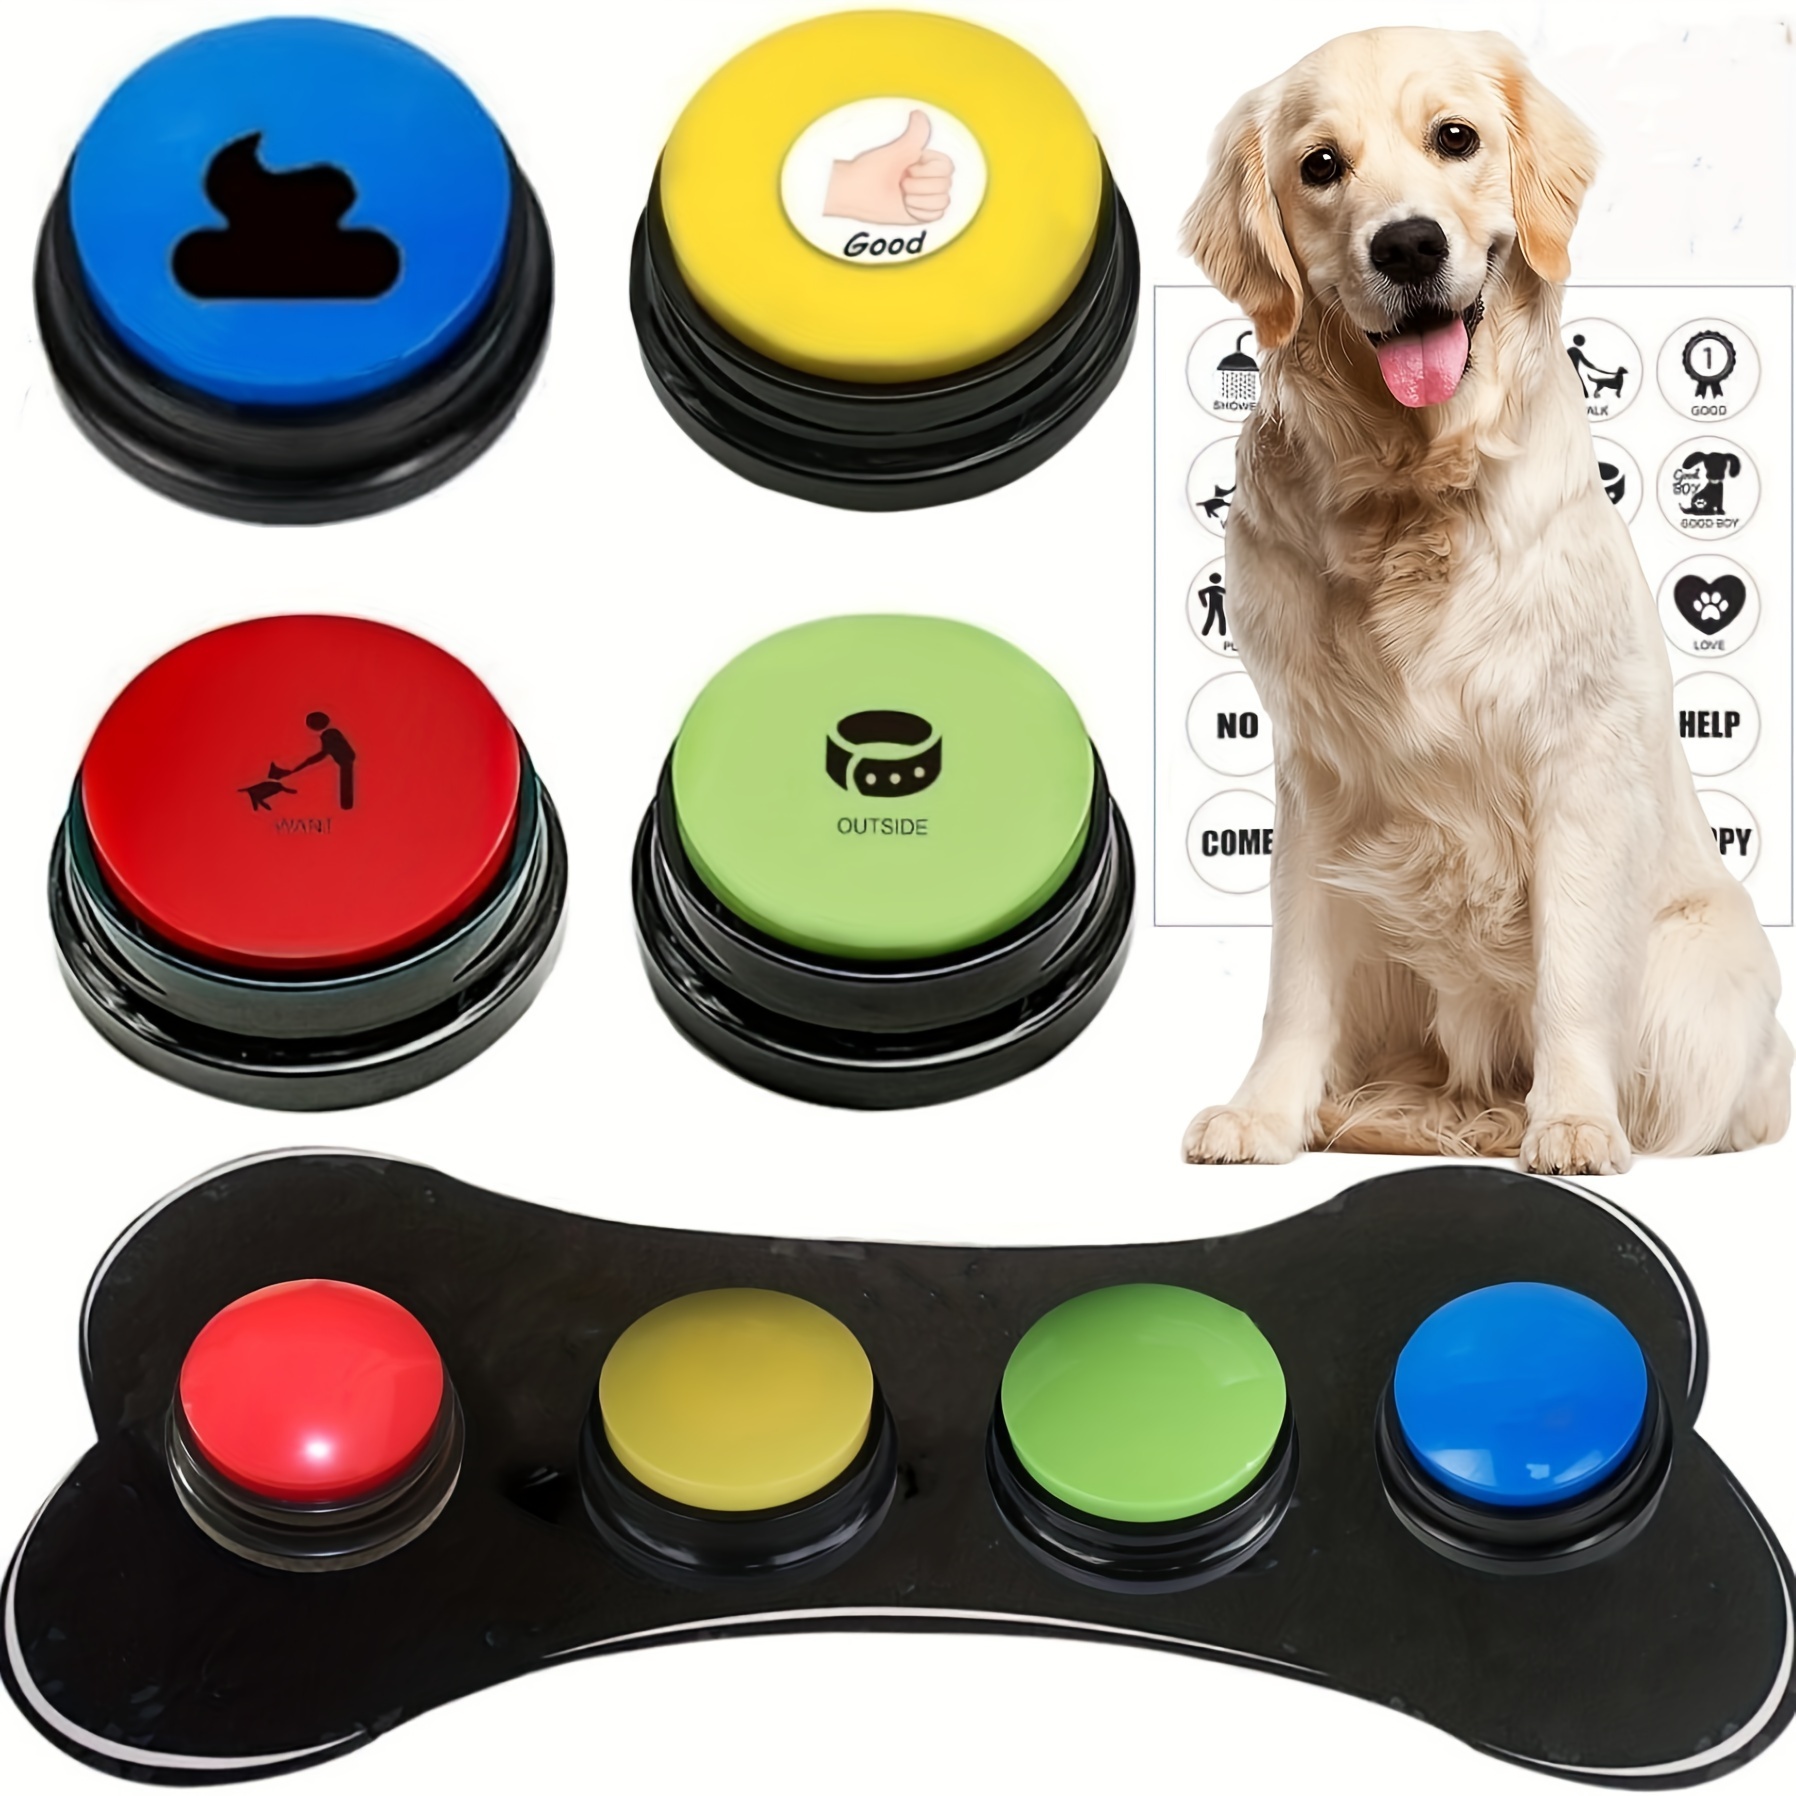 2Pcs Electronic Talking YES NO Sound Button Toy Green Red Event Home Office  Party Funny Gag Toy Supplies For Kids Adult Toy Gift